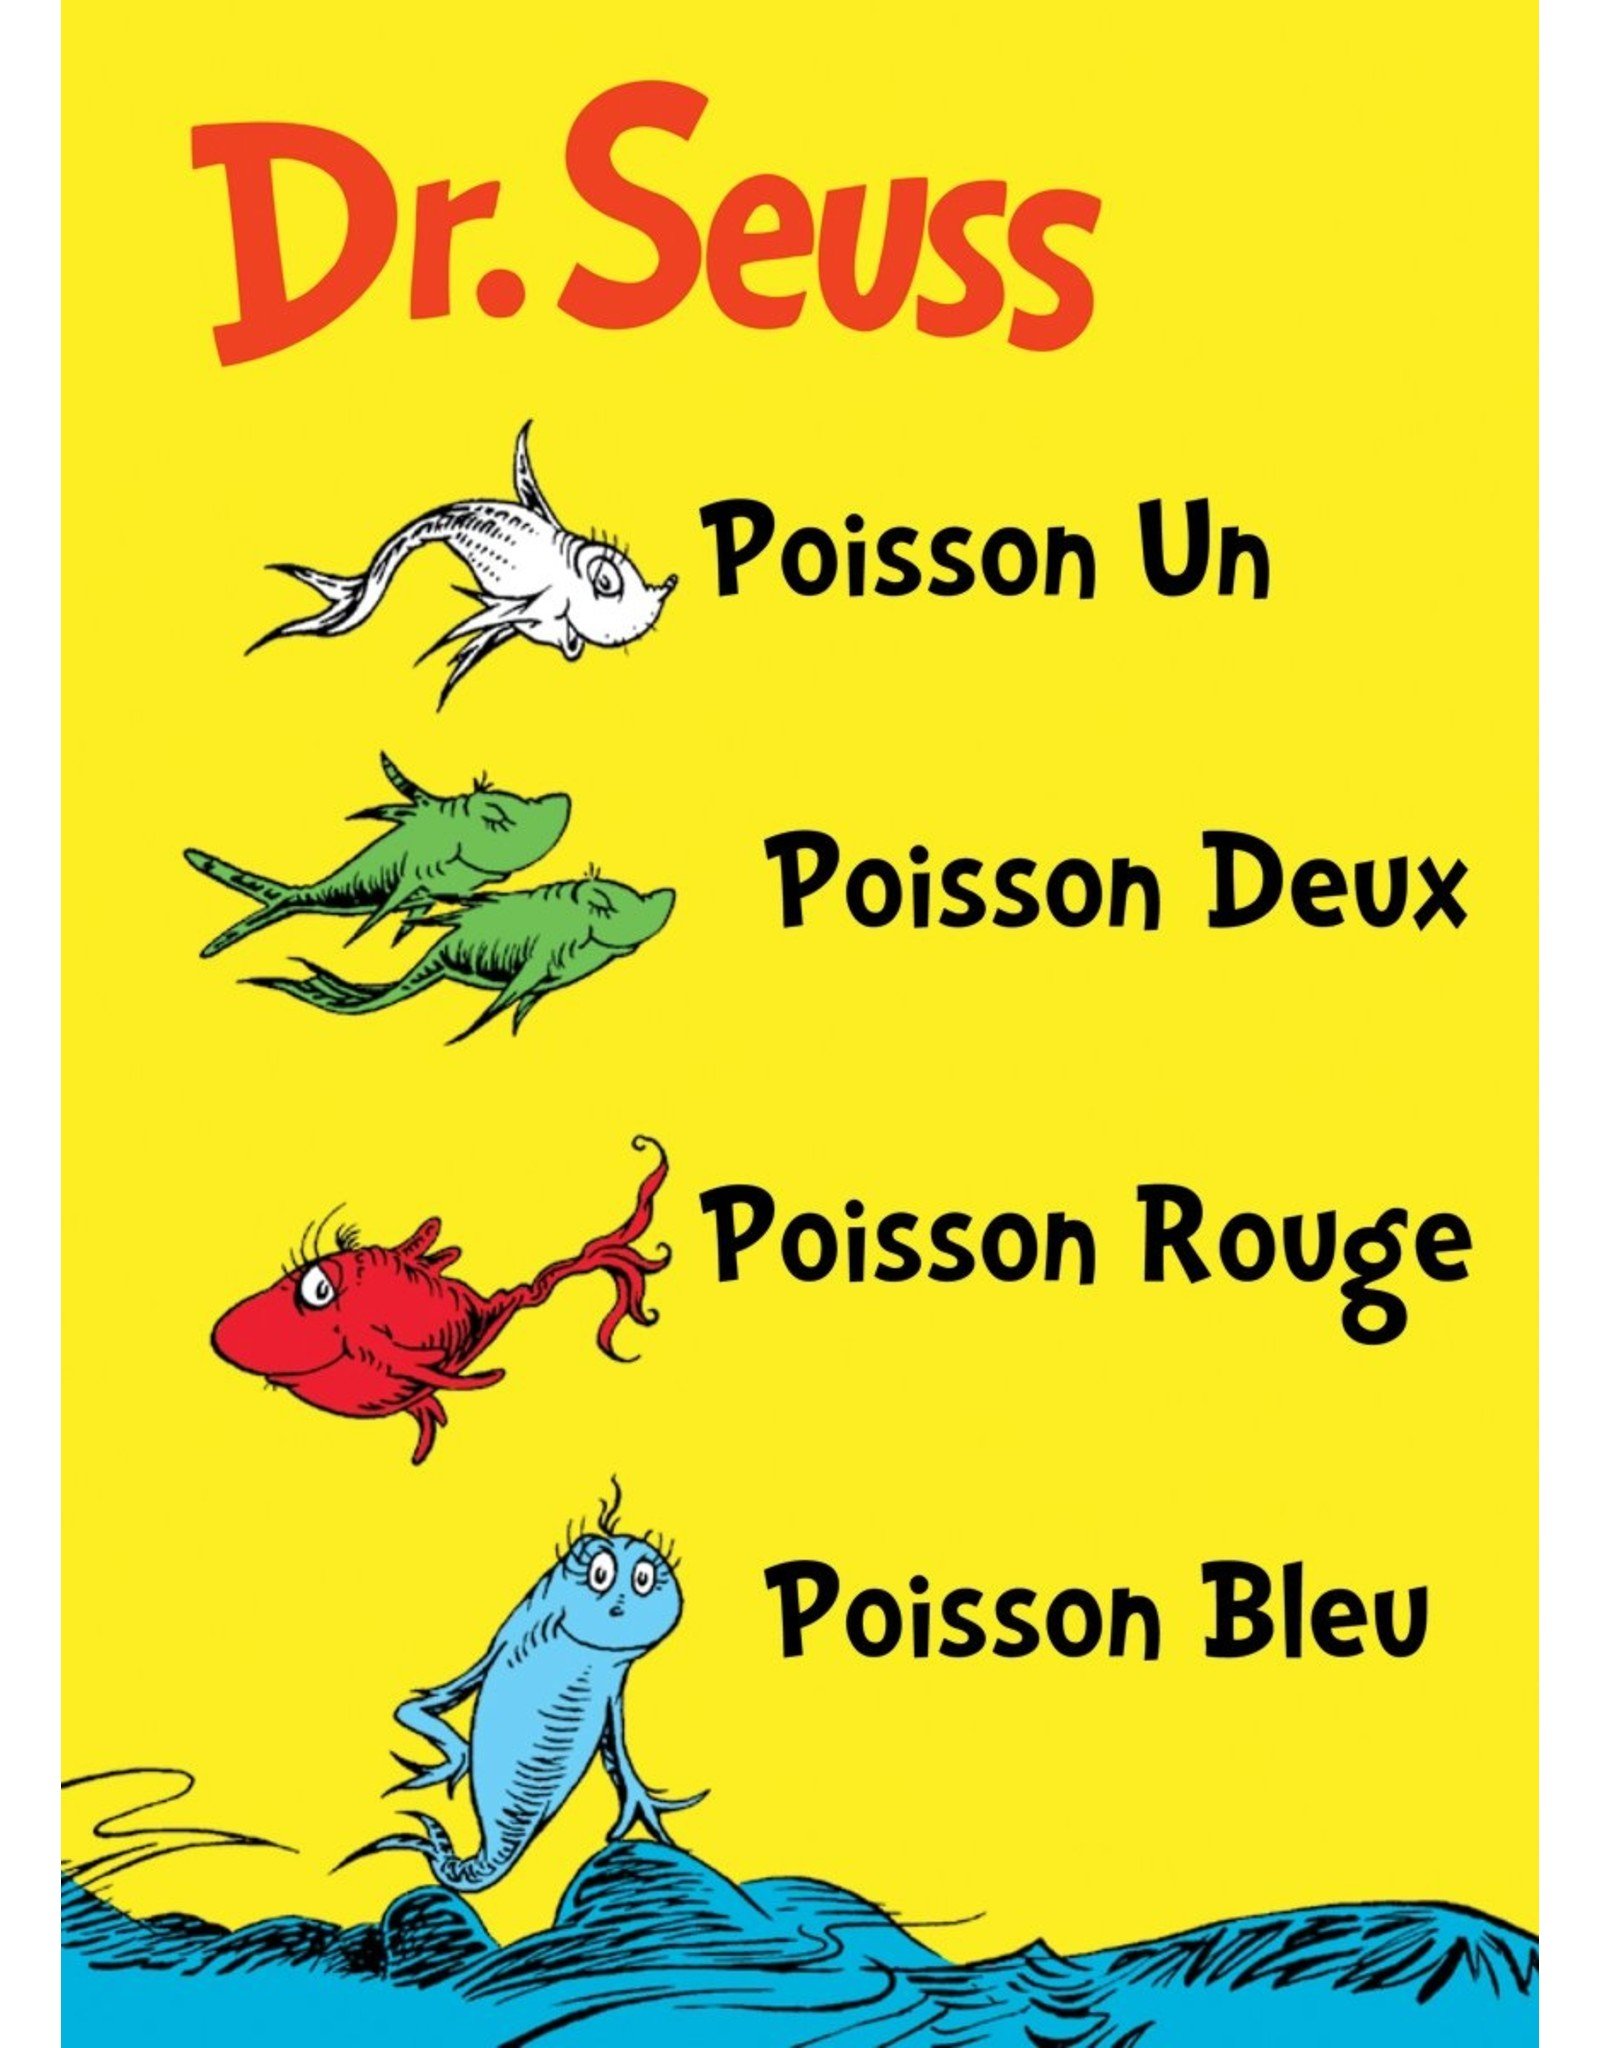 Literature Poisson Un Poisson Deux Poisson Rouge Poisson Bleu: The French Edition of One Fish Two Fish Red Fish Blue Fish